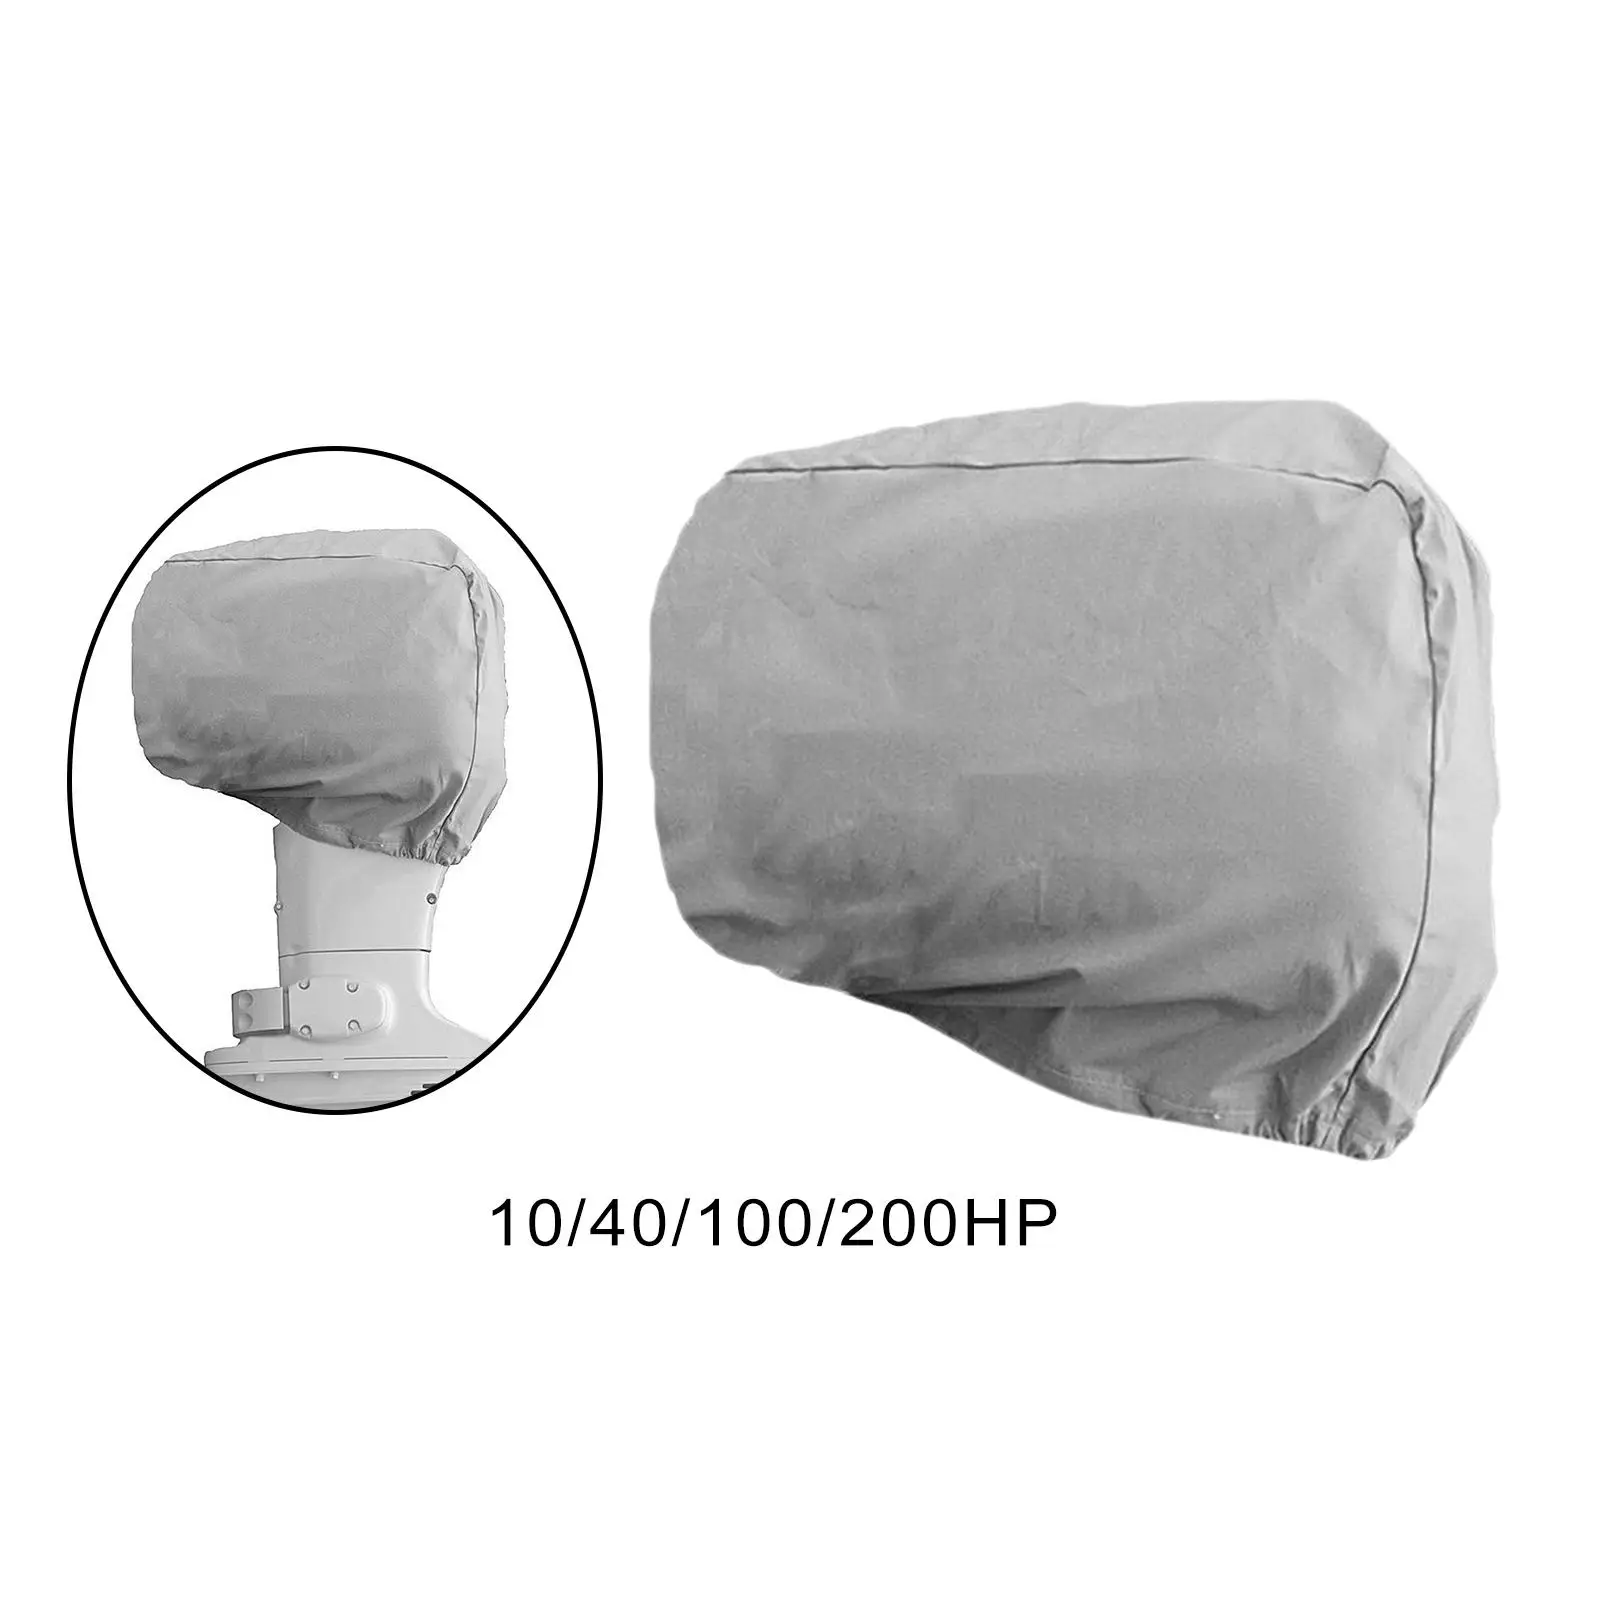 Outboard Motor Cover Tear Resistant Engine Protector Adjustable Oxford Silver Waterproof Boat Hood Covers for Boating Fishing